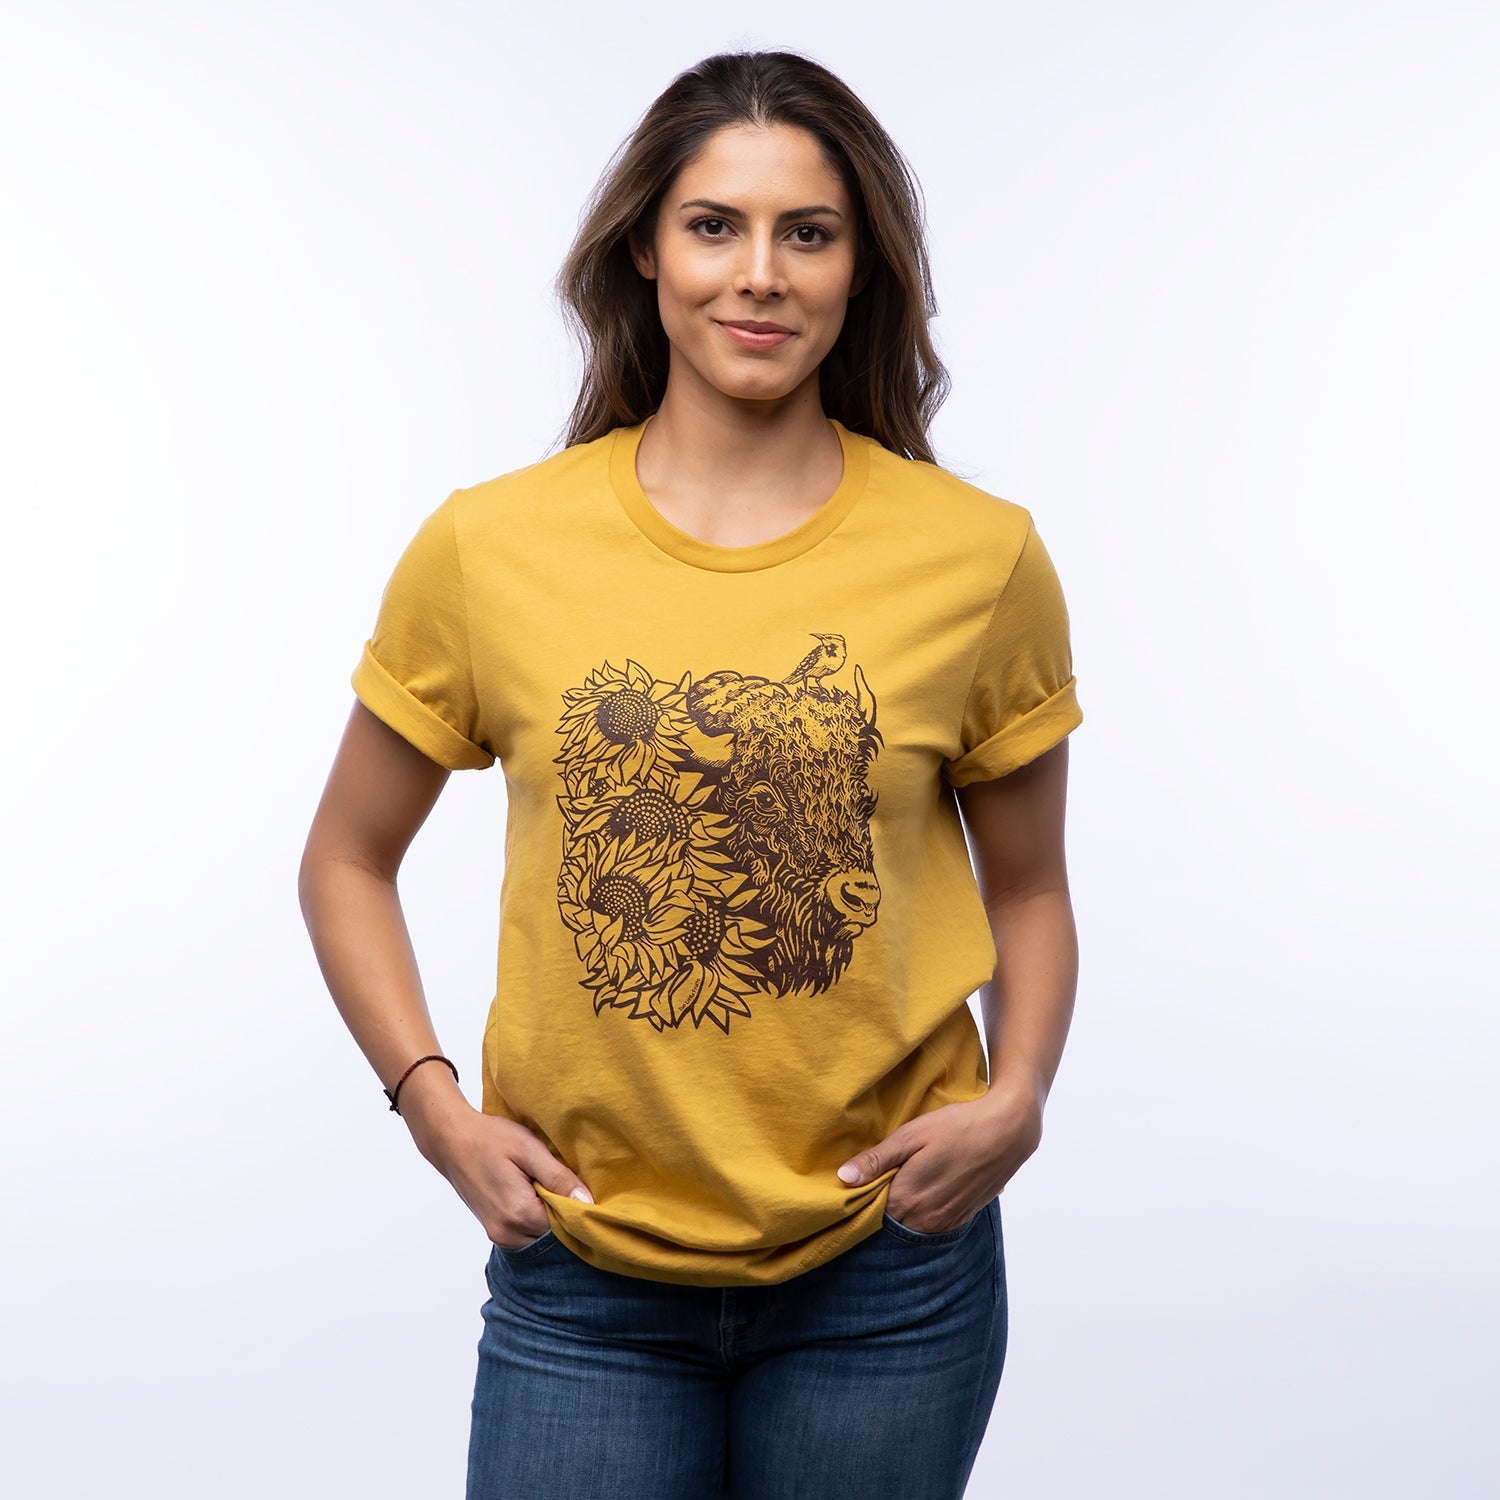 Bison with Sunflowers Tee - Mustard, Tee Shirts - Two Little Fruits